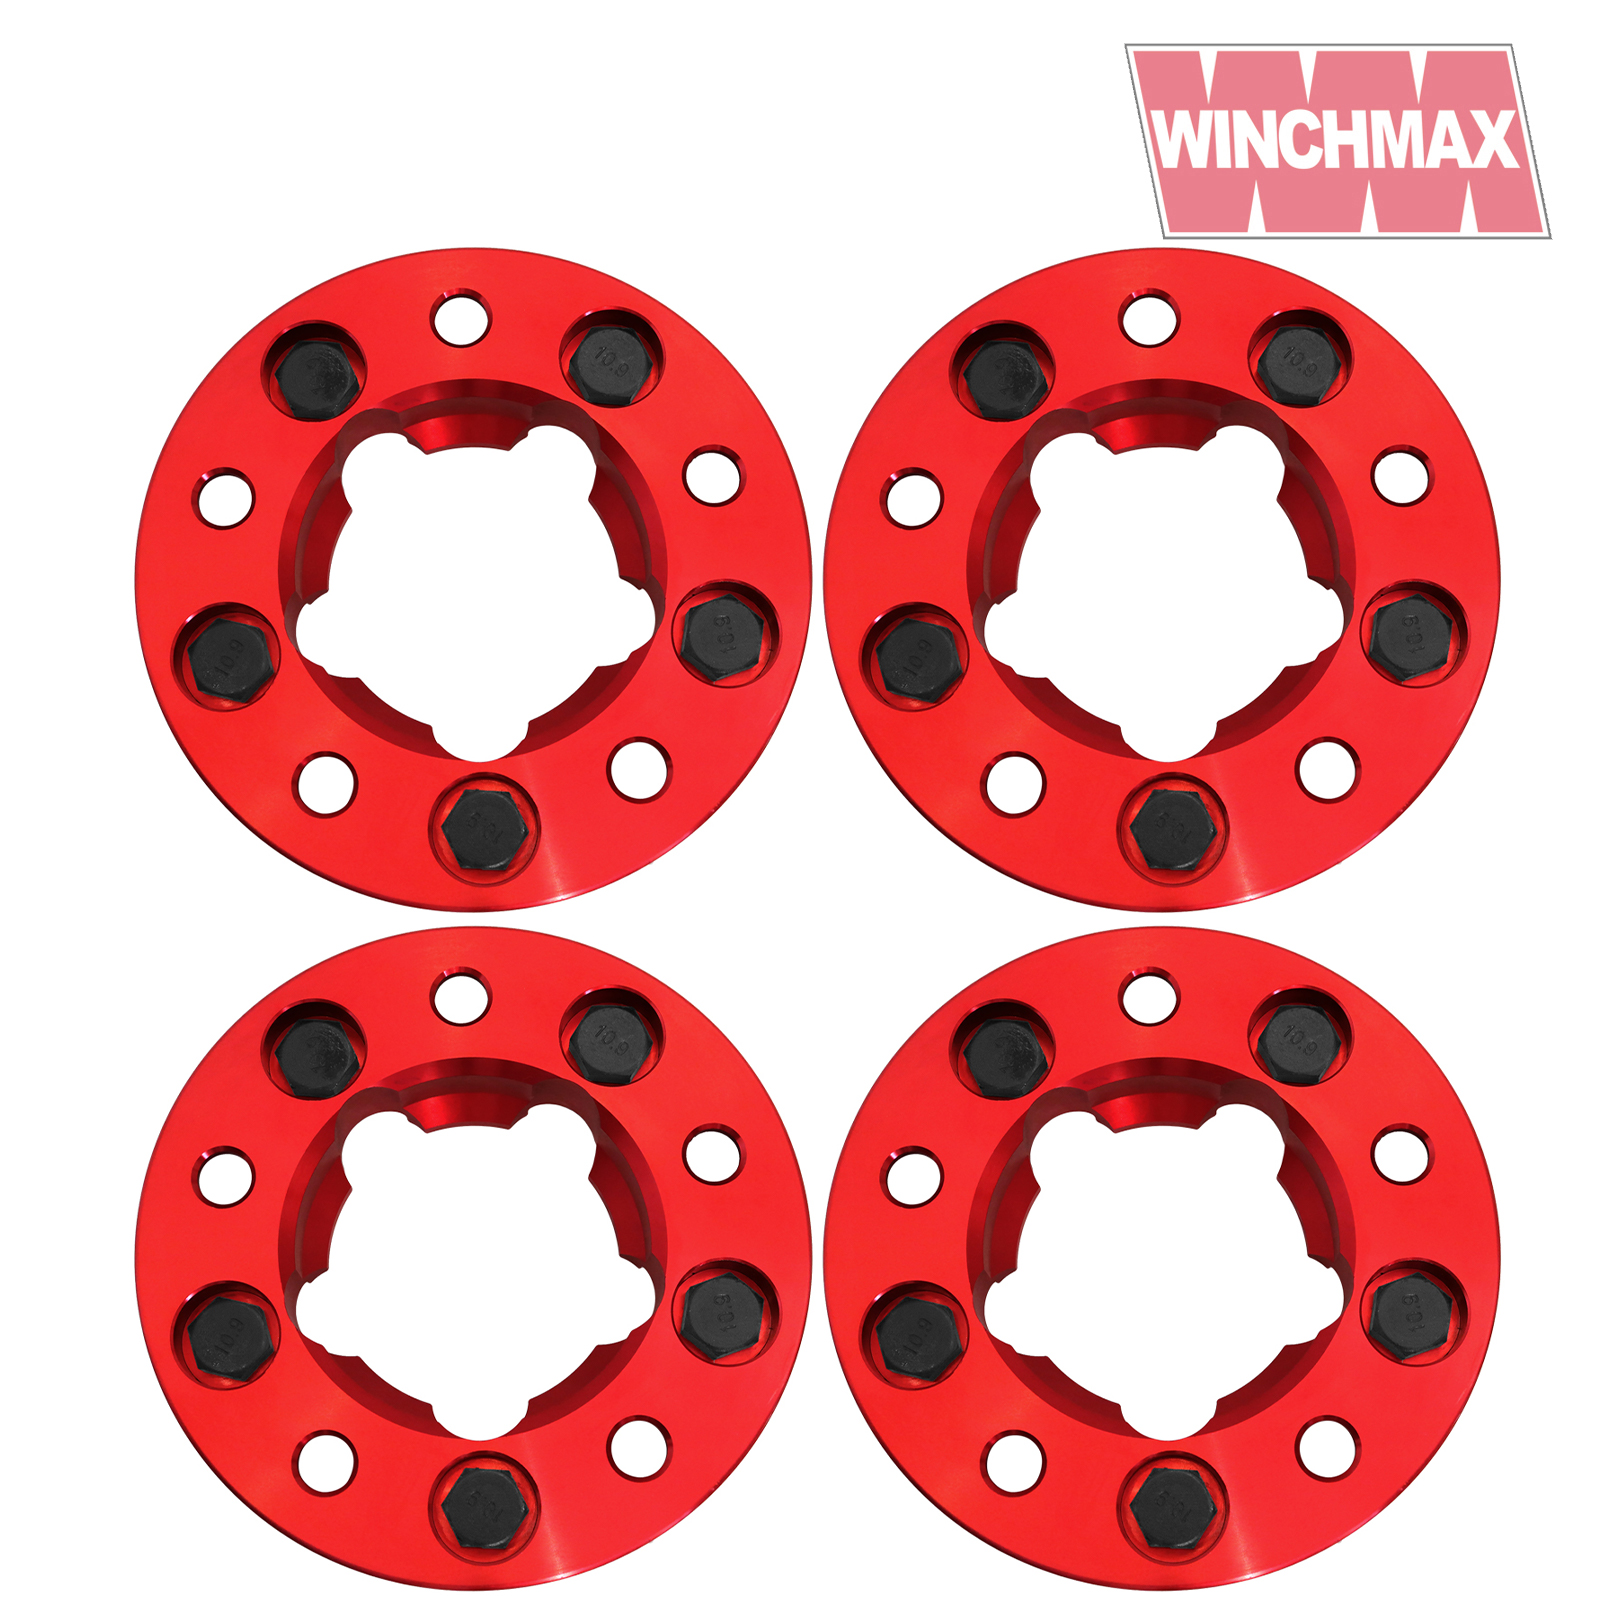 WINCHMAX 30mm Wheel Spacer T1